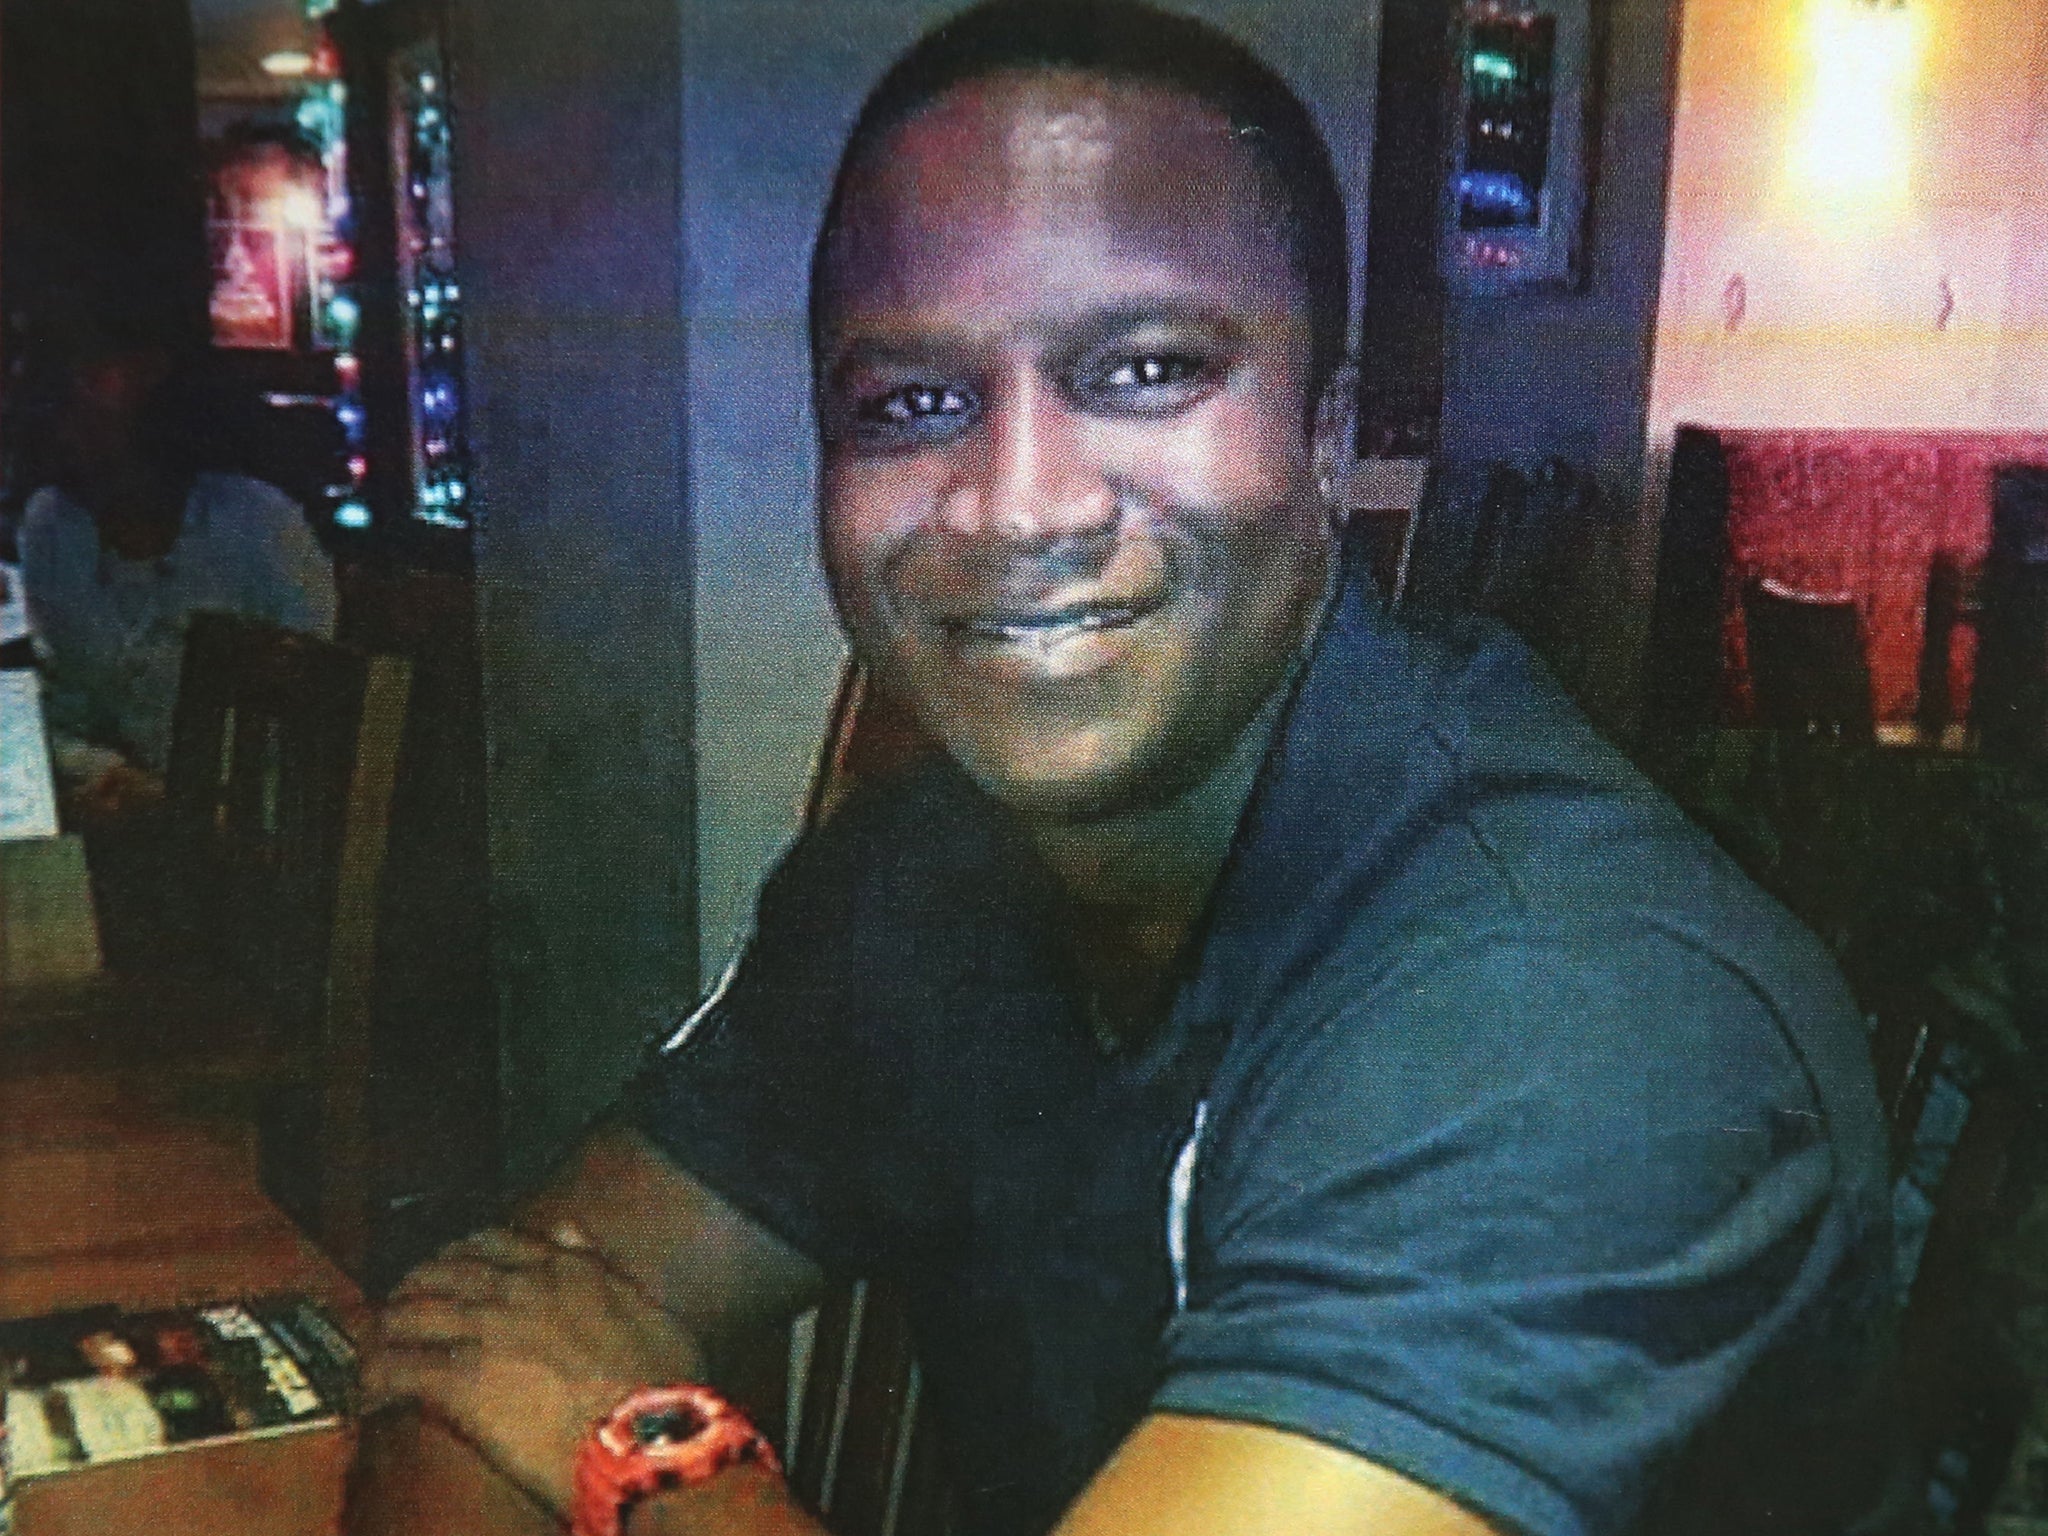 The family of Sheku Bayoh are suing Police Scotland's Acting Chief Constable Iain Livingstone